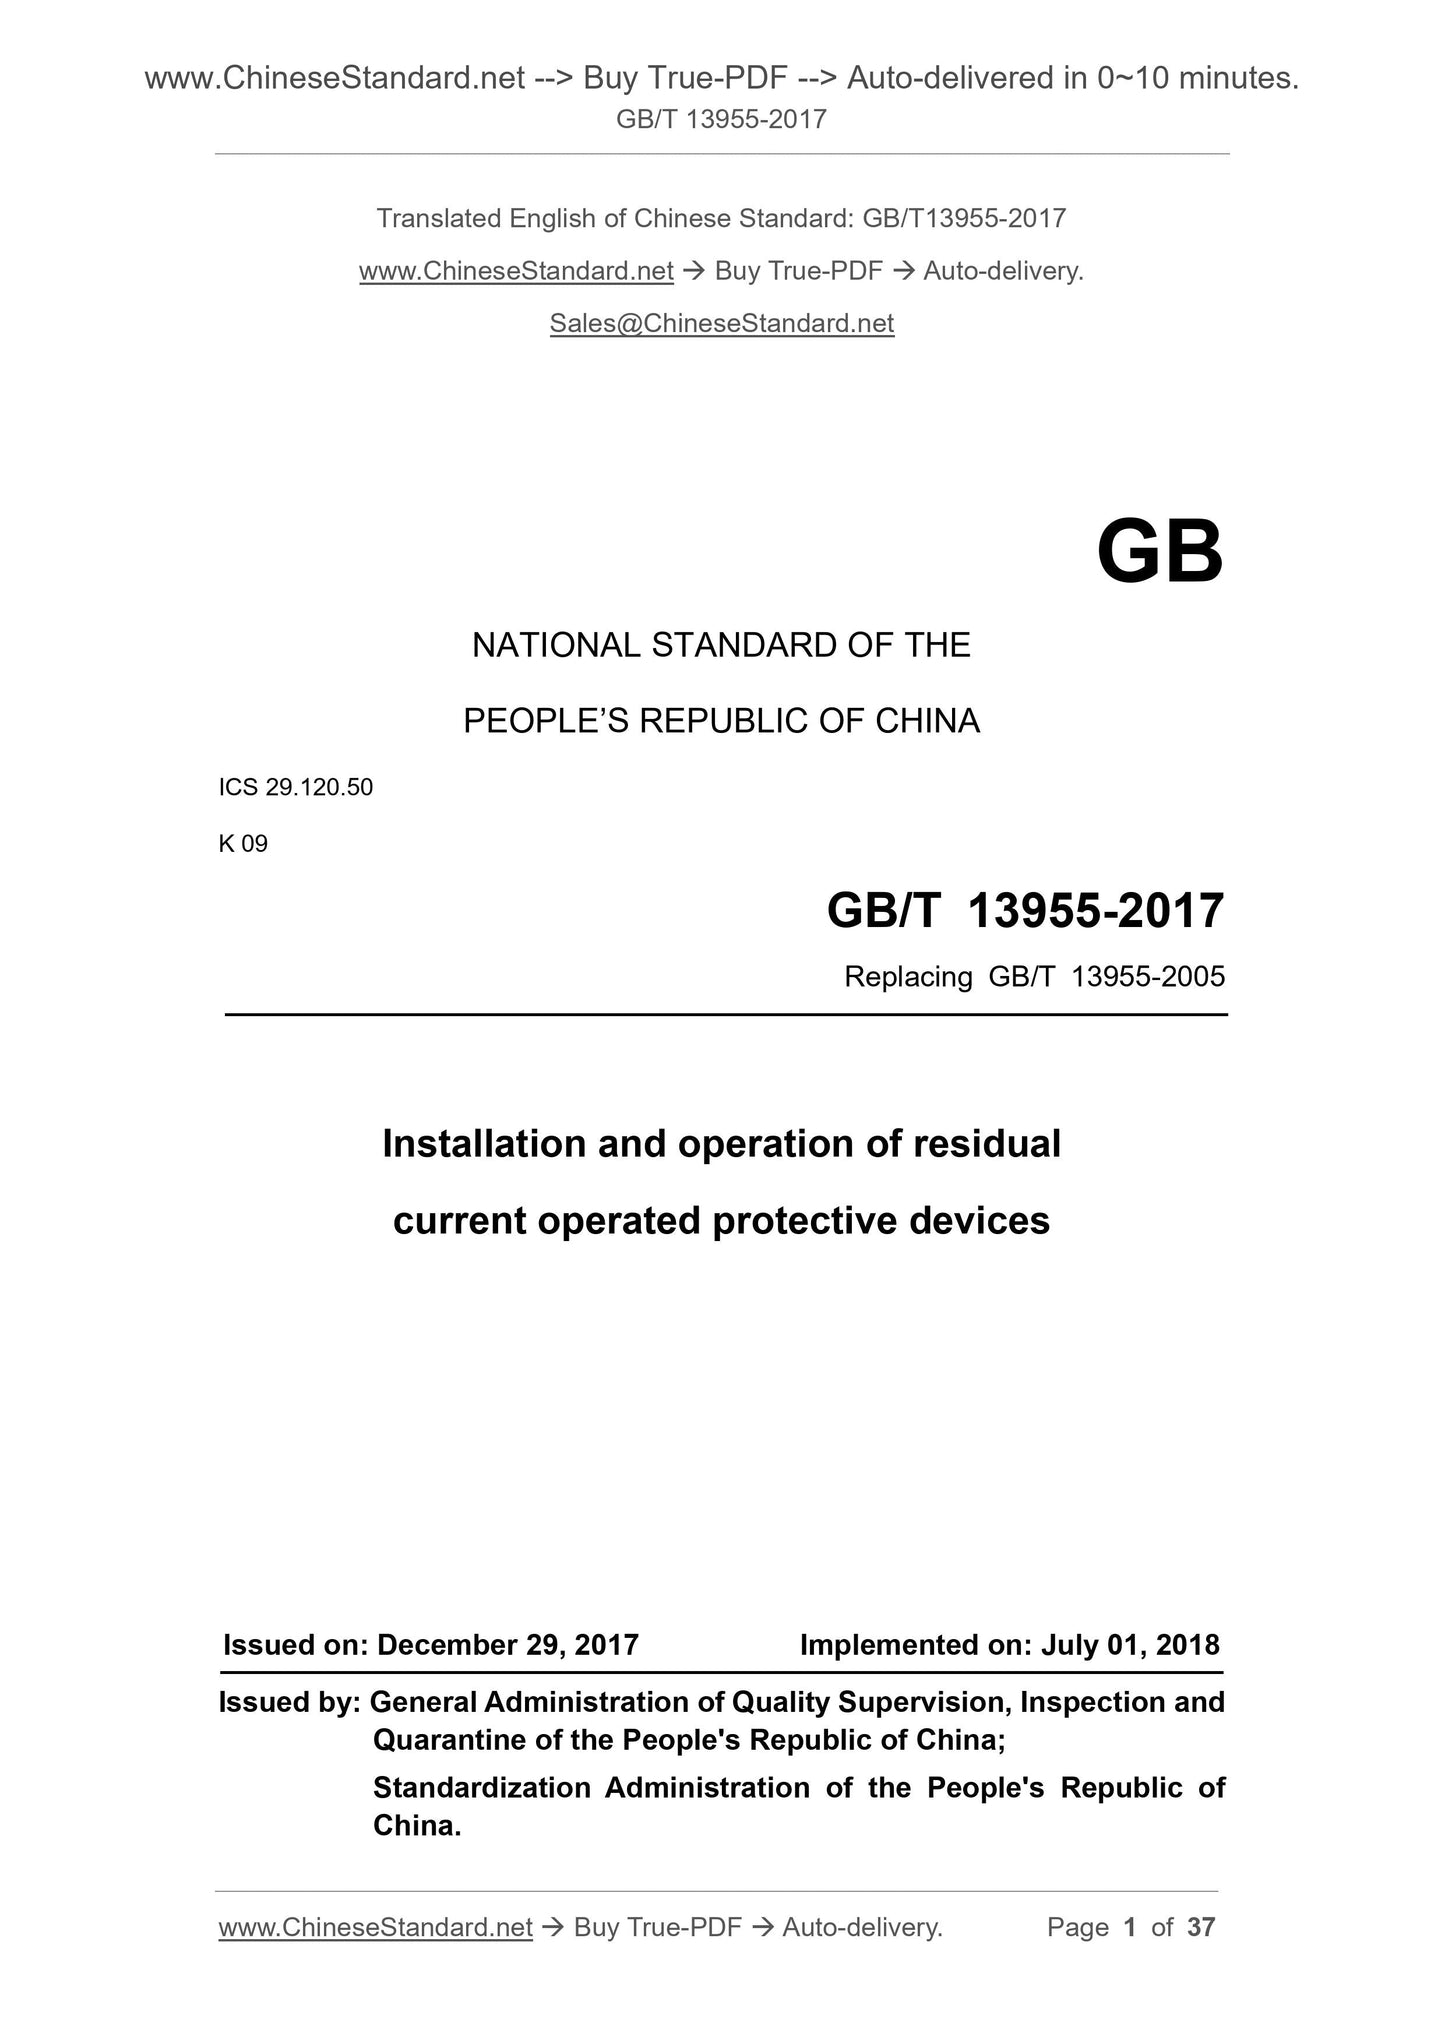 GB/T 13955-2017 Page 1